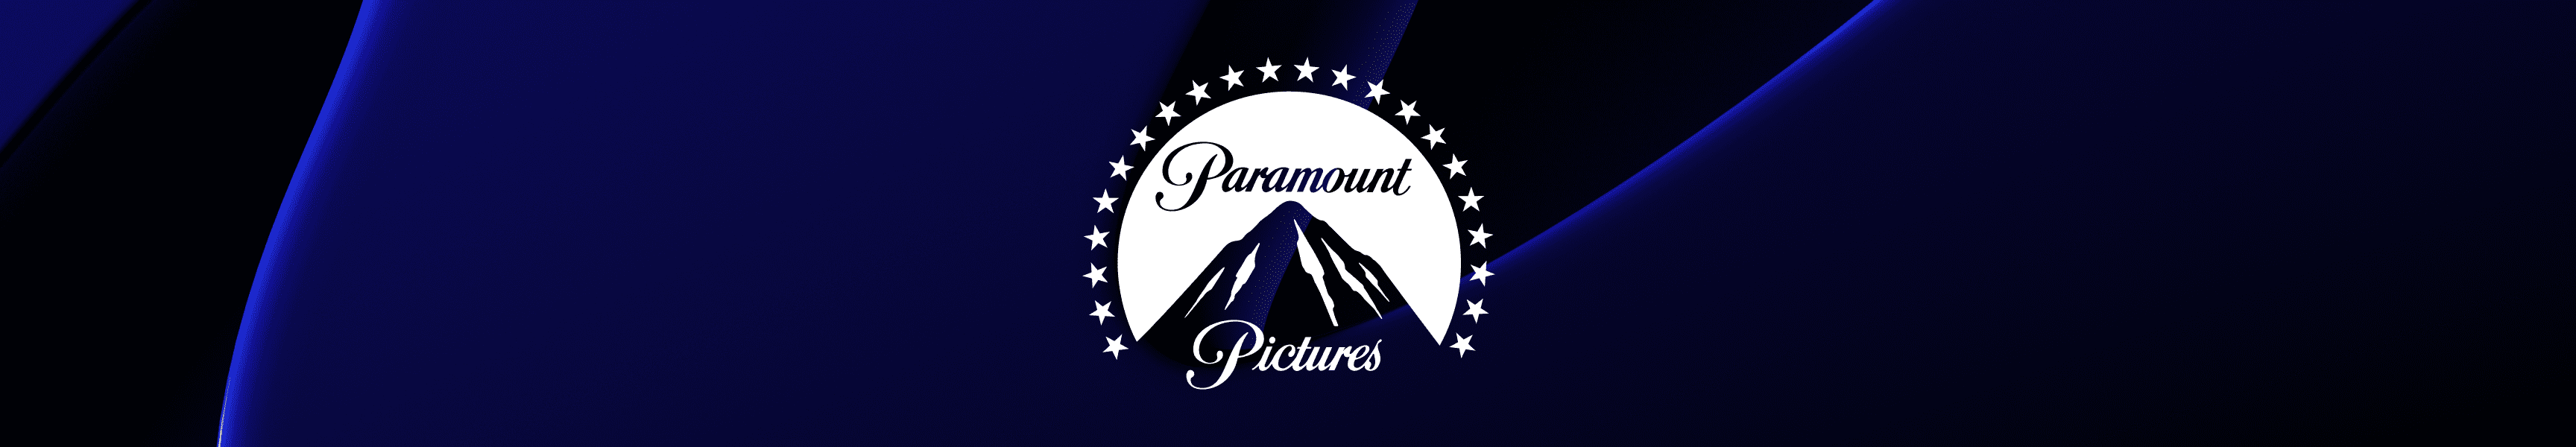 Paramount Pictures Best Sellers